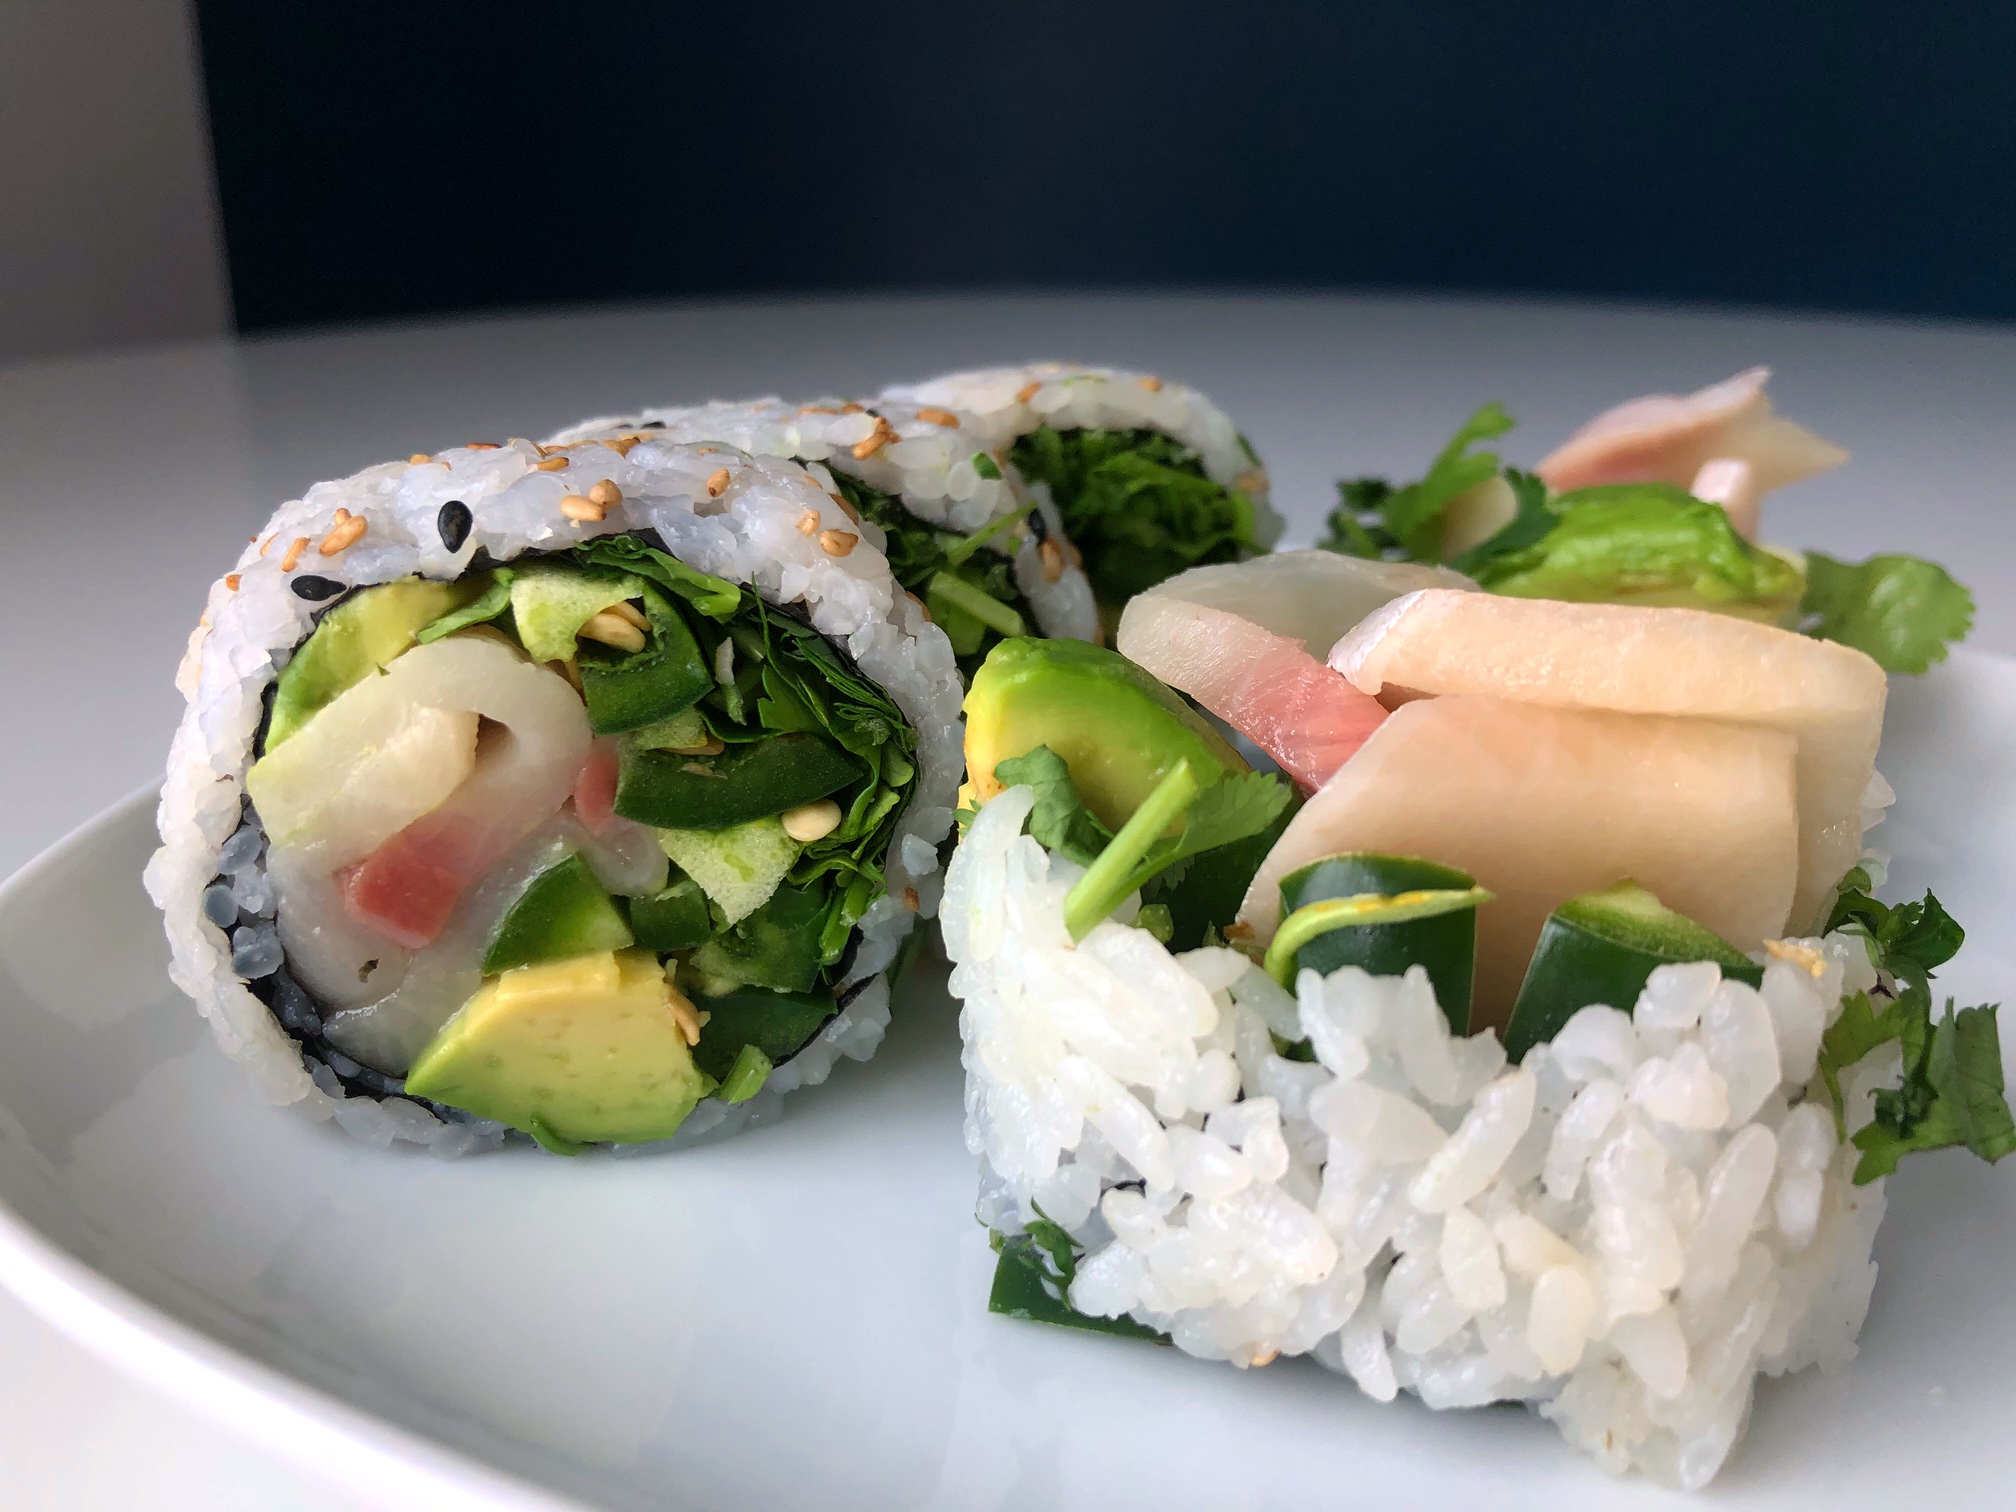 This Mexican roll has yellowtail, cucumber, and large bunches of cilantro wrapped in white sushi rice. The roll is on a white plate with a navy wall behind it. Photo by Alyssa Buckley.